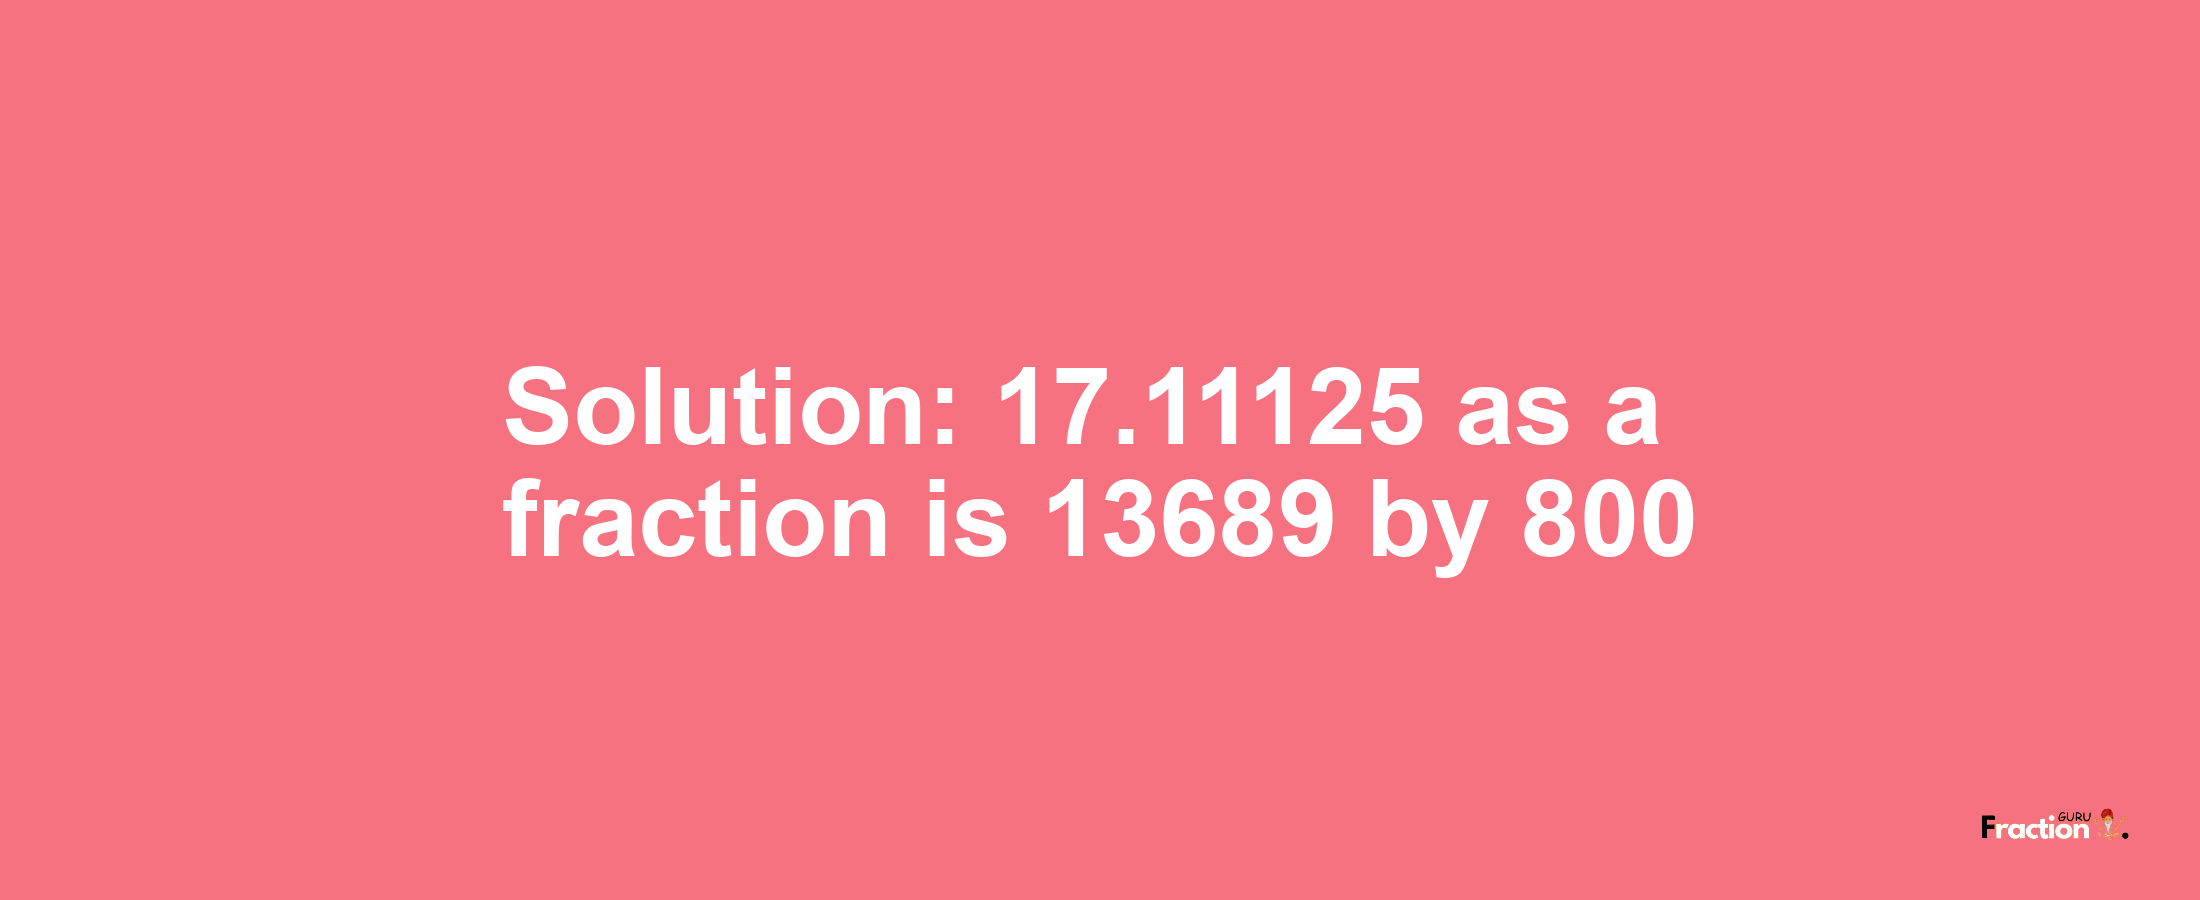 Solution:17.11125 as a fraction is 13689/800